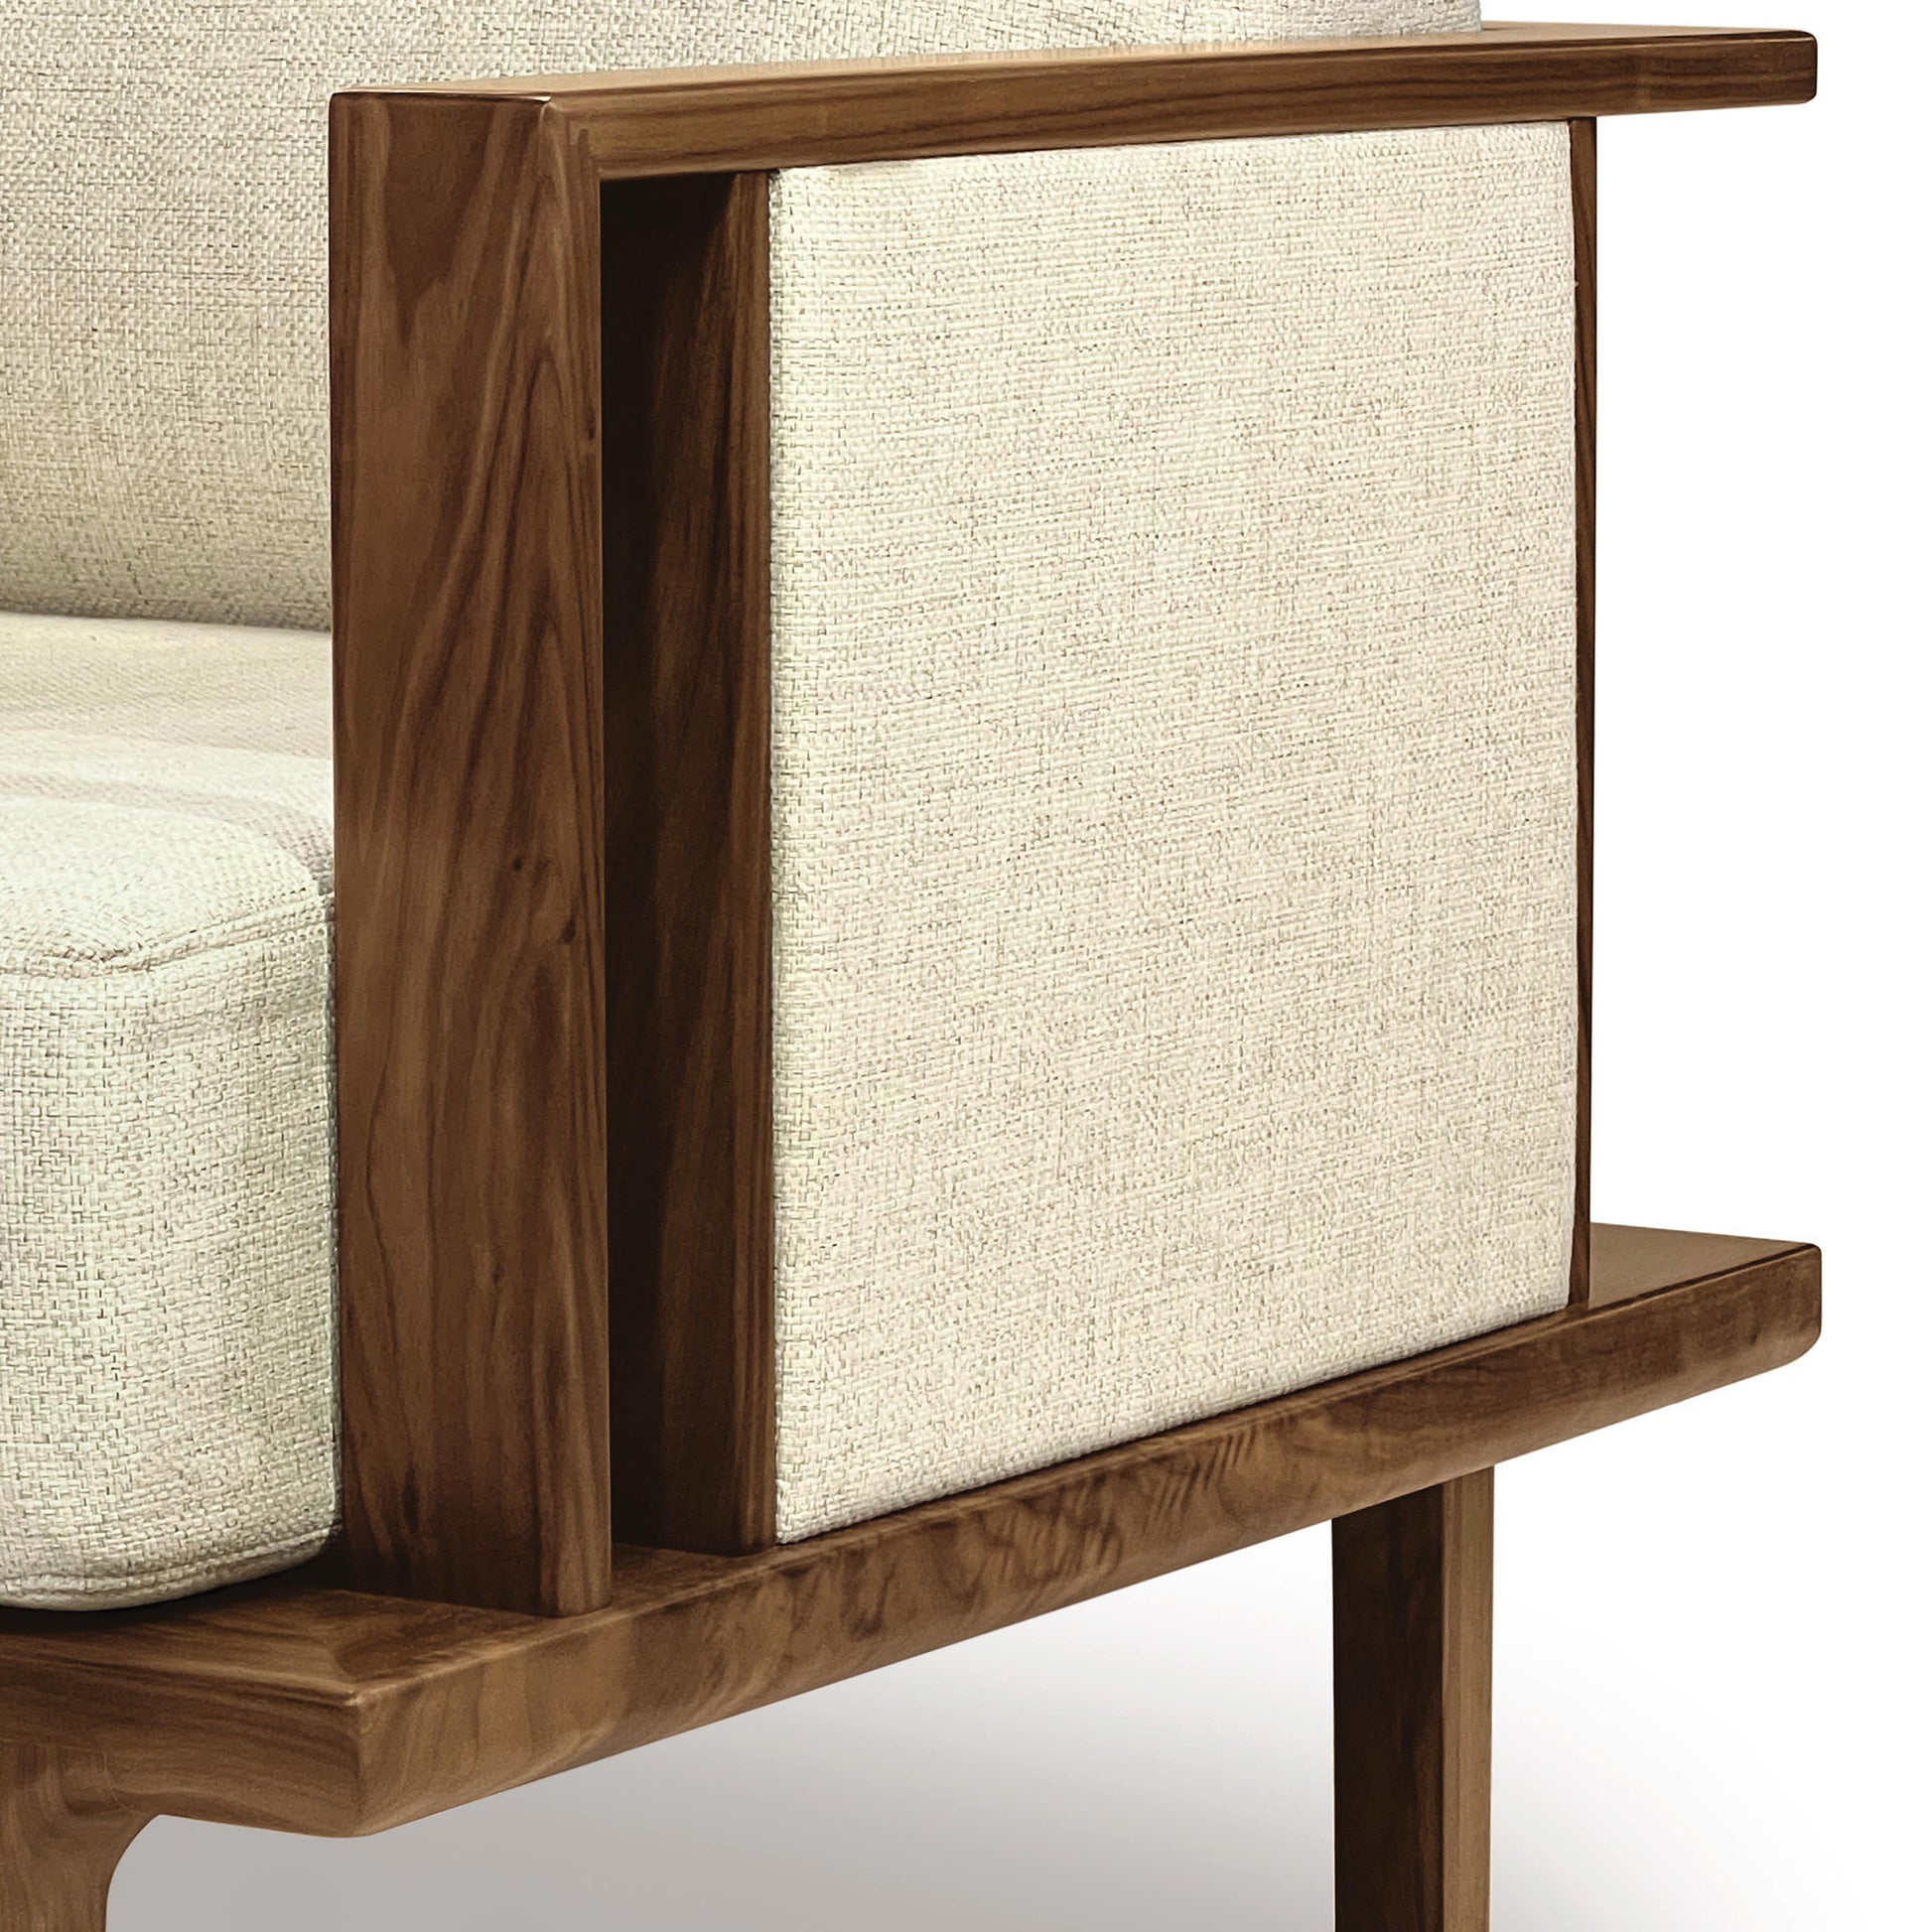 Close-up of a modern Copeland Furniture Sierra Walnut Upholstered Chair with cream-colored custom upholstery option.